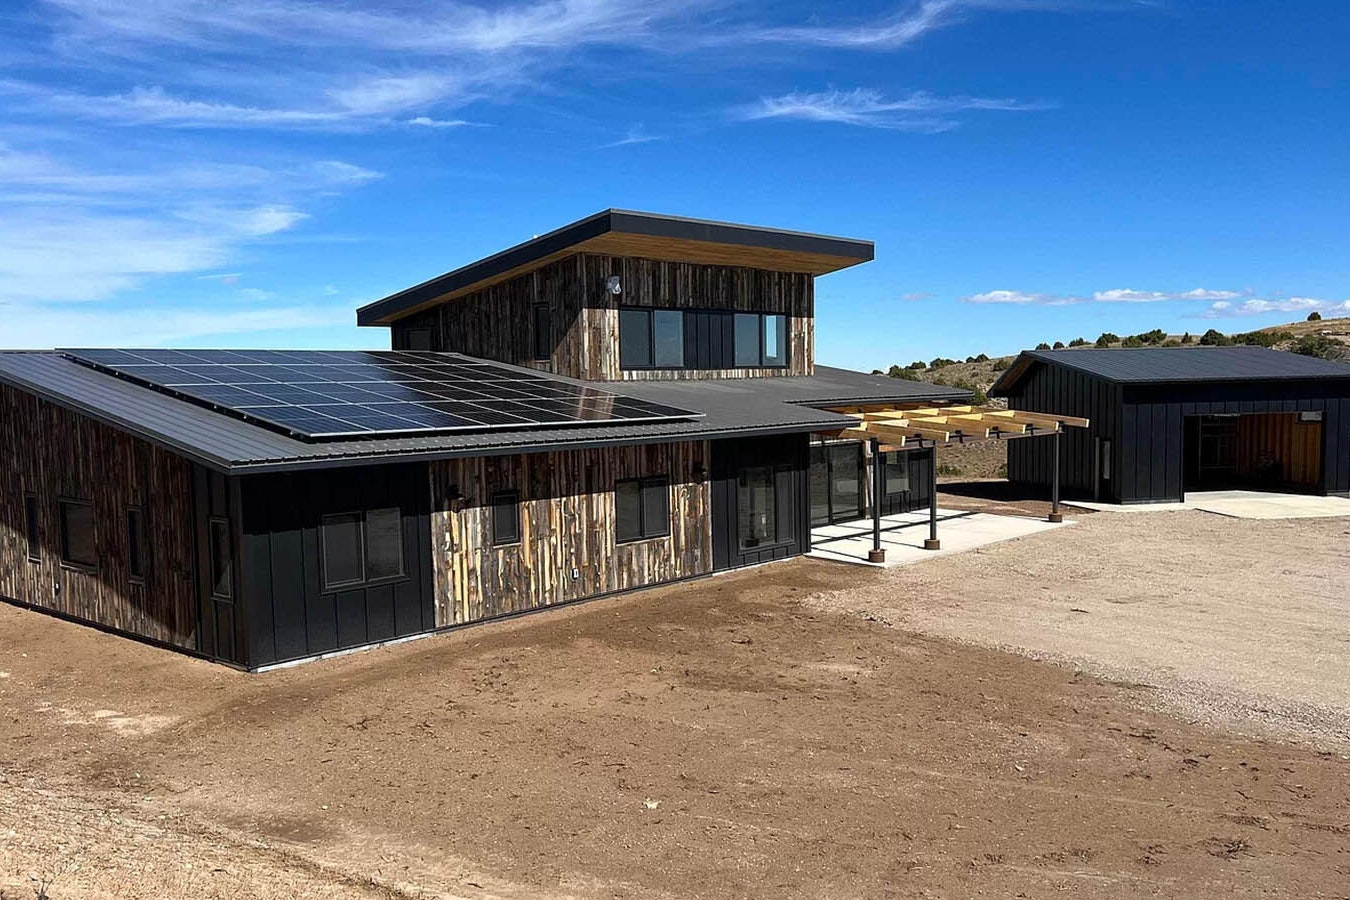 The net zero house has a modern look with materials and design that fit well with Wyoming and a rural landscape.